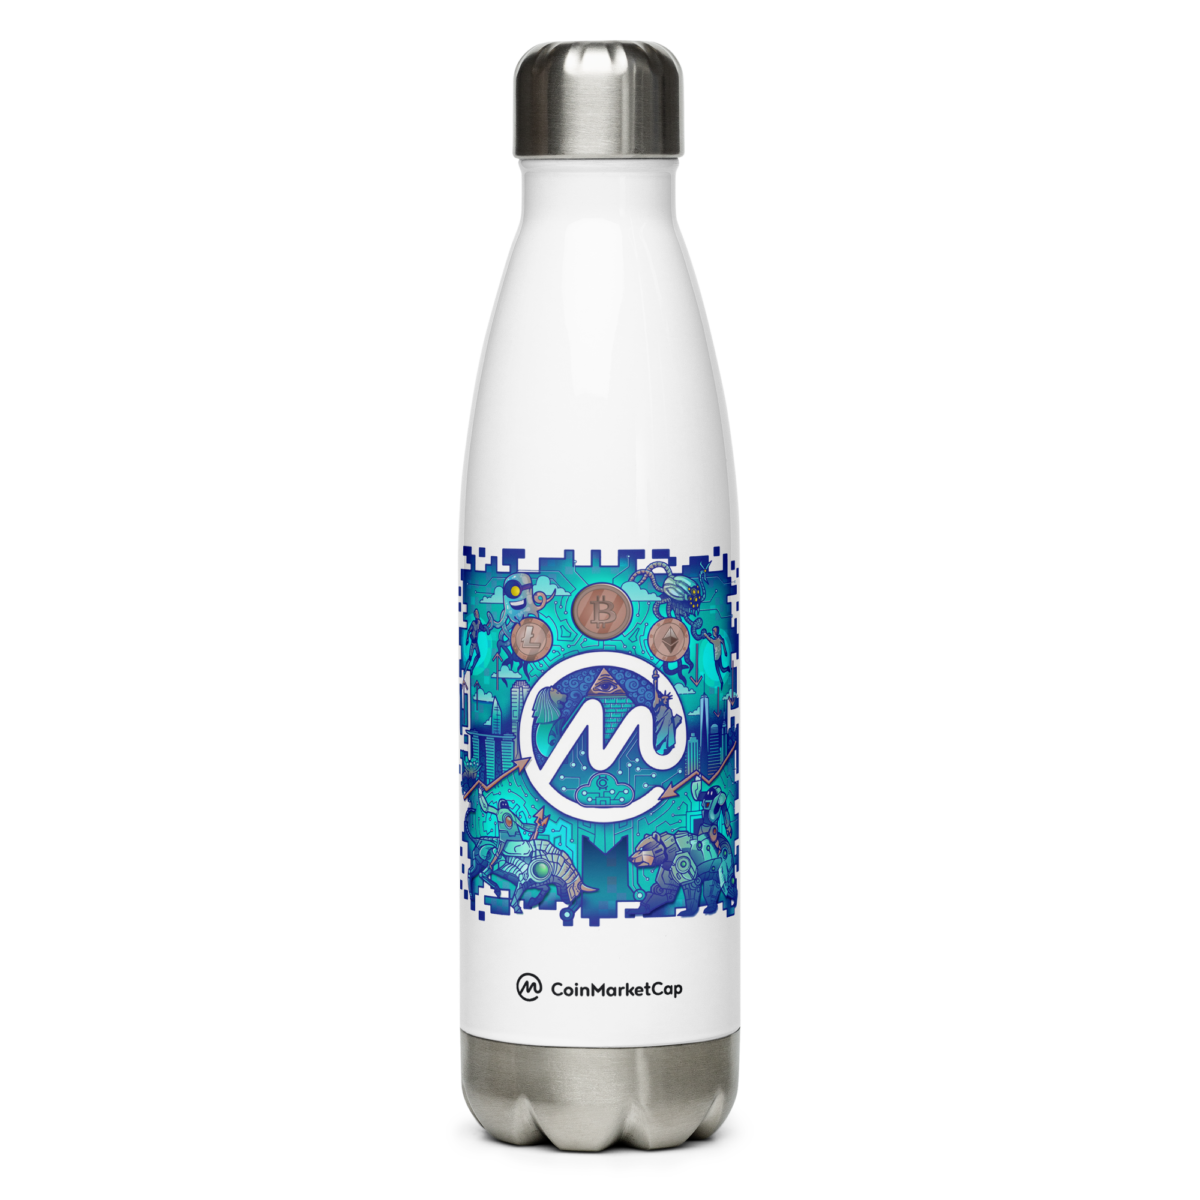 stainless steel water bottle white 17oz front 63091fc596186 - CoinMarketCap Stainless Steel Water Bottle